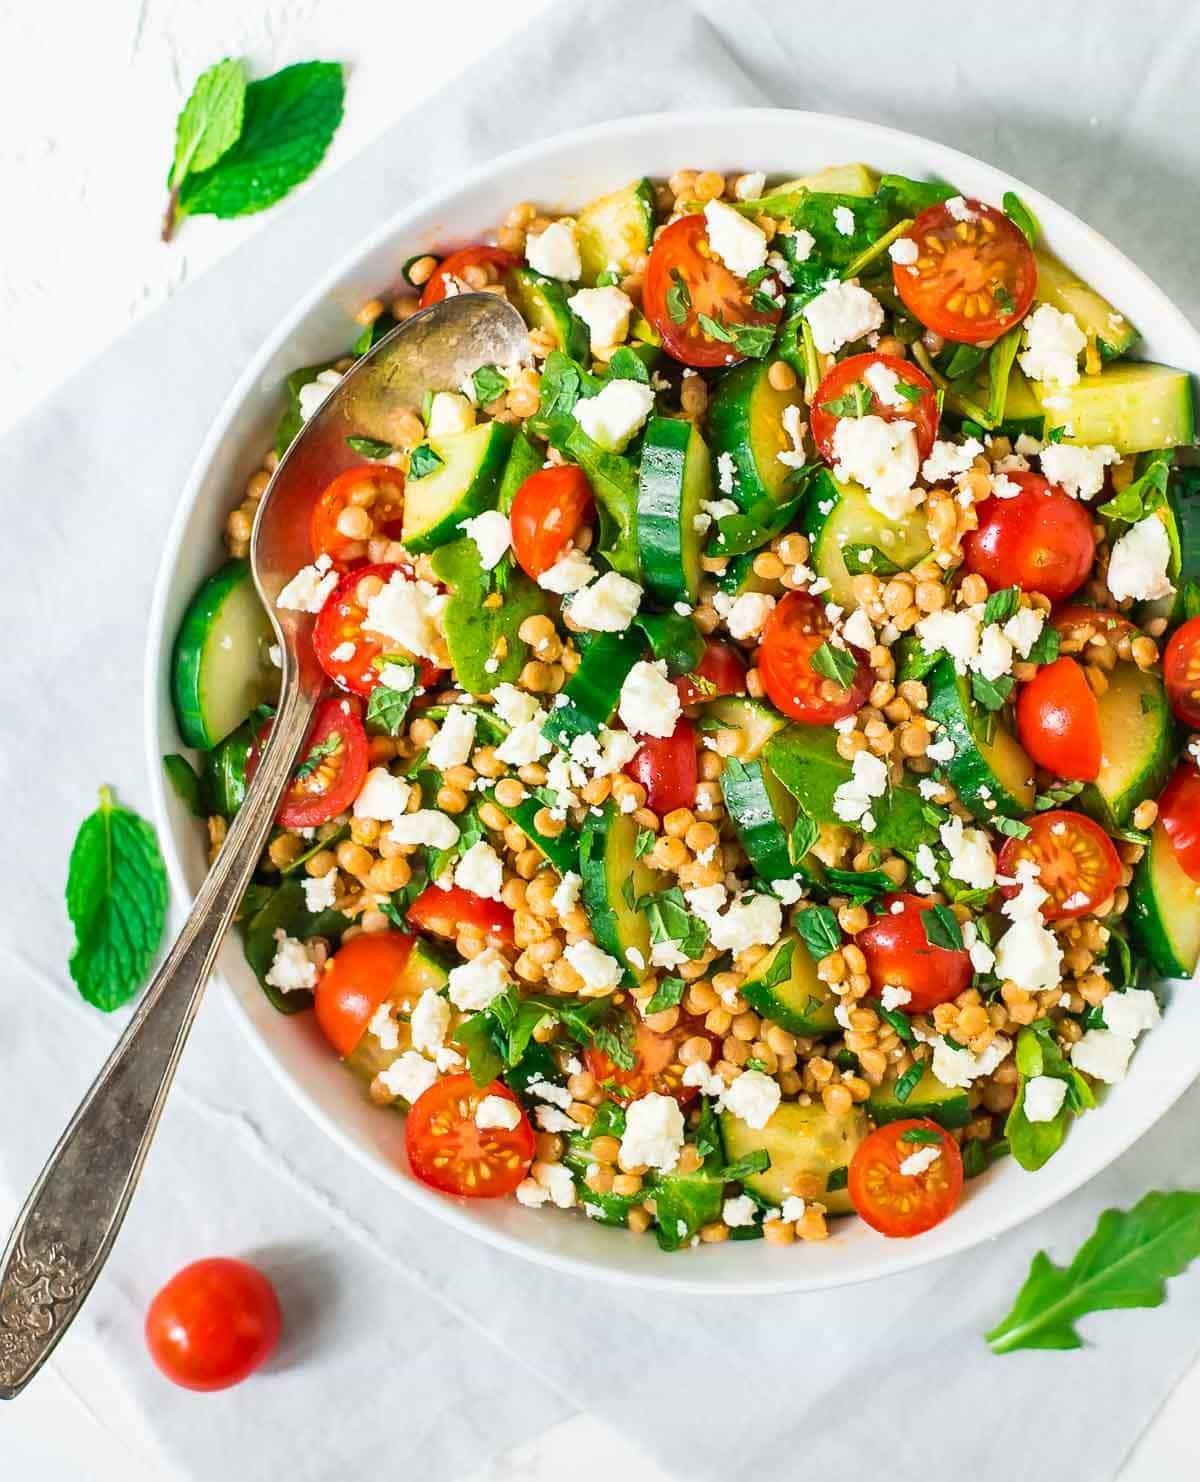 Top view of Israeli couscous salad with fresh veggies and herbs.